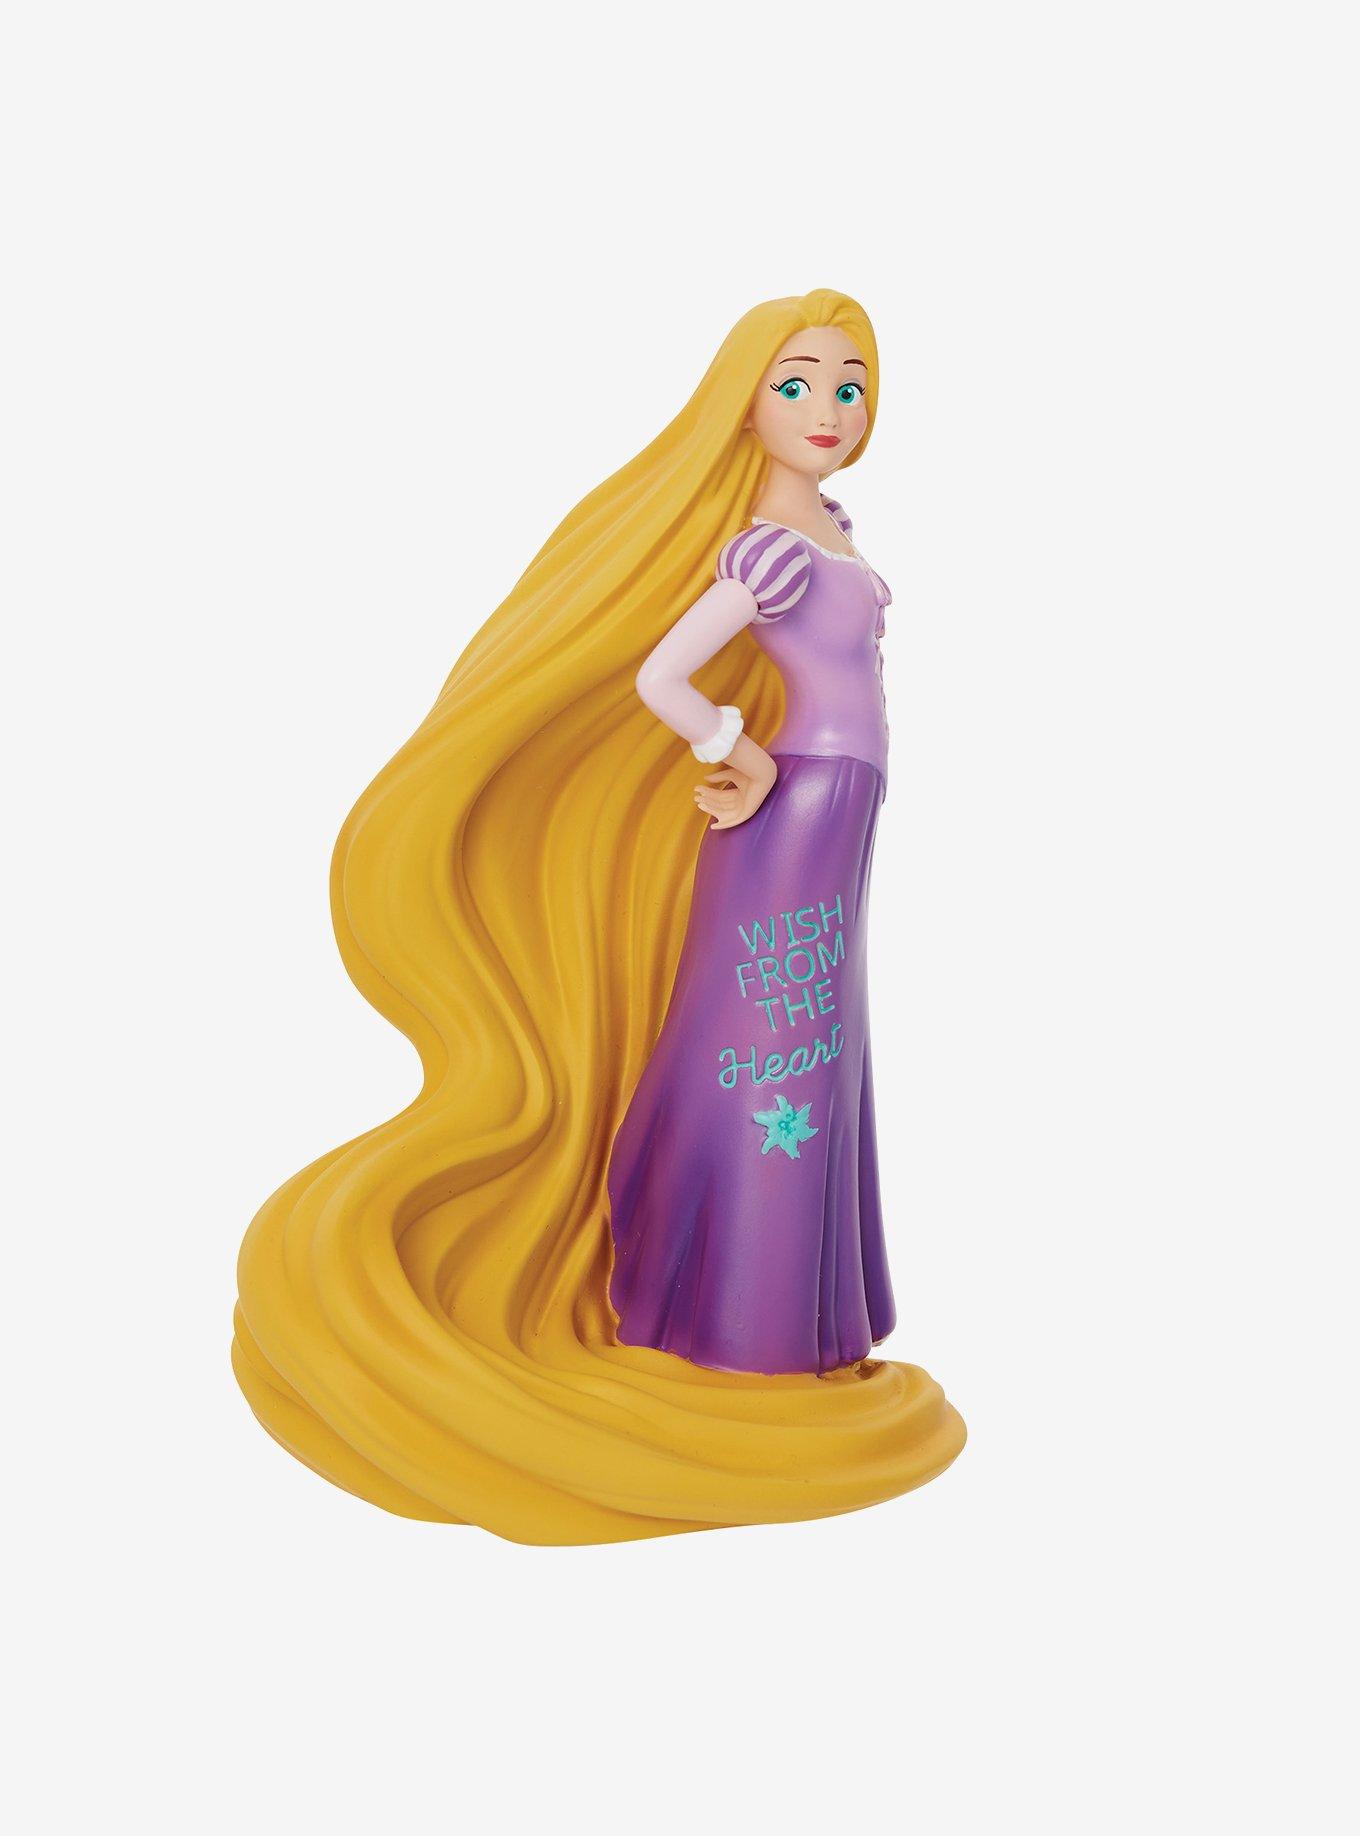 Rapunzel Inspired Princess Personalized Water Bottle. Great 